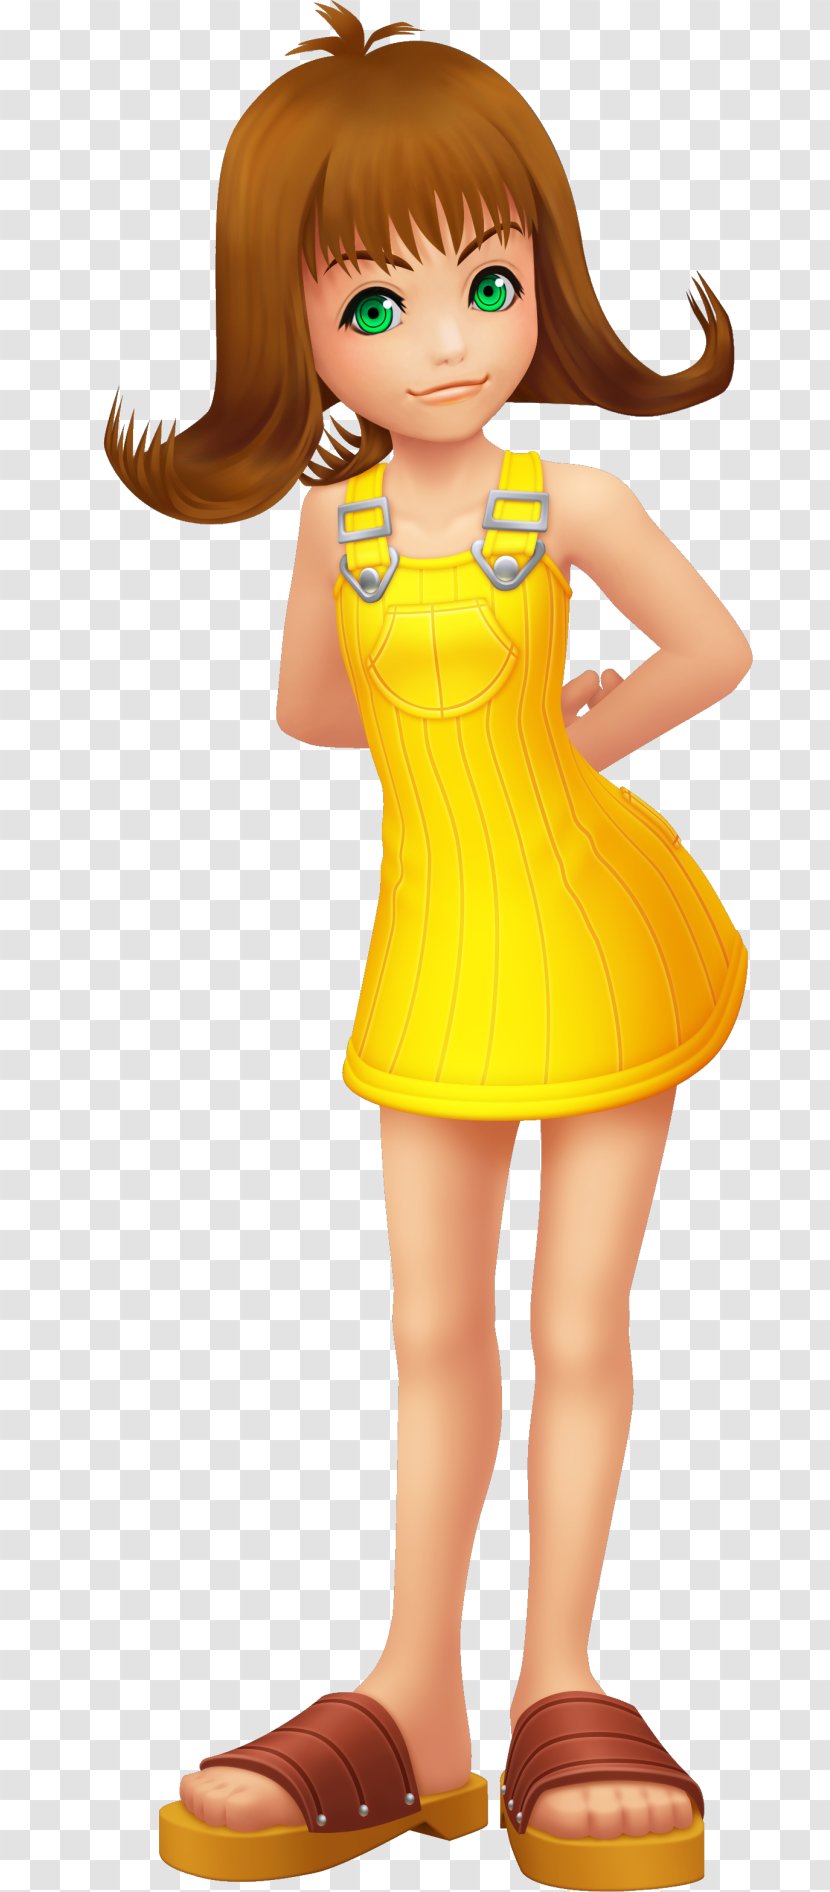 Kingdom Hearts III Coded Hearts: Chain Of Memories Final Mix - Flower - Selphie Tilmitt Transparent PNG